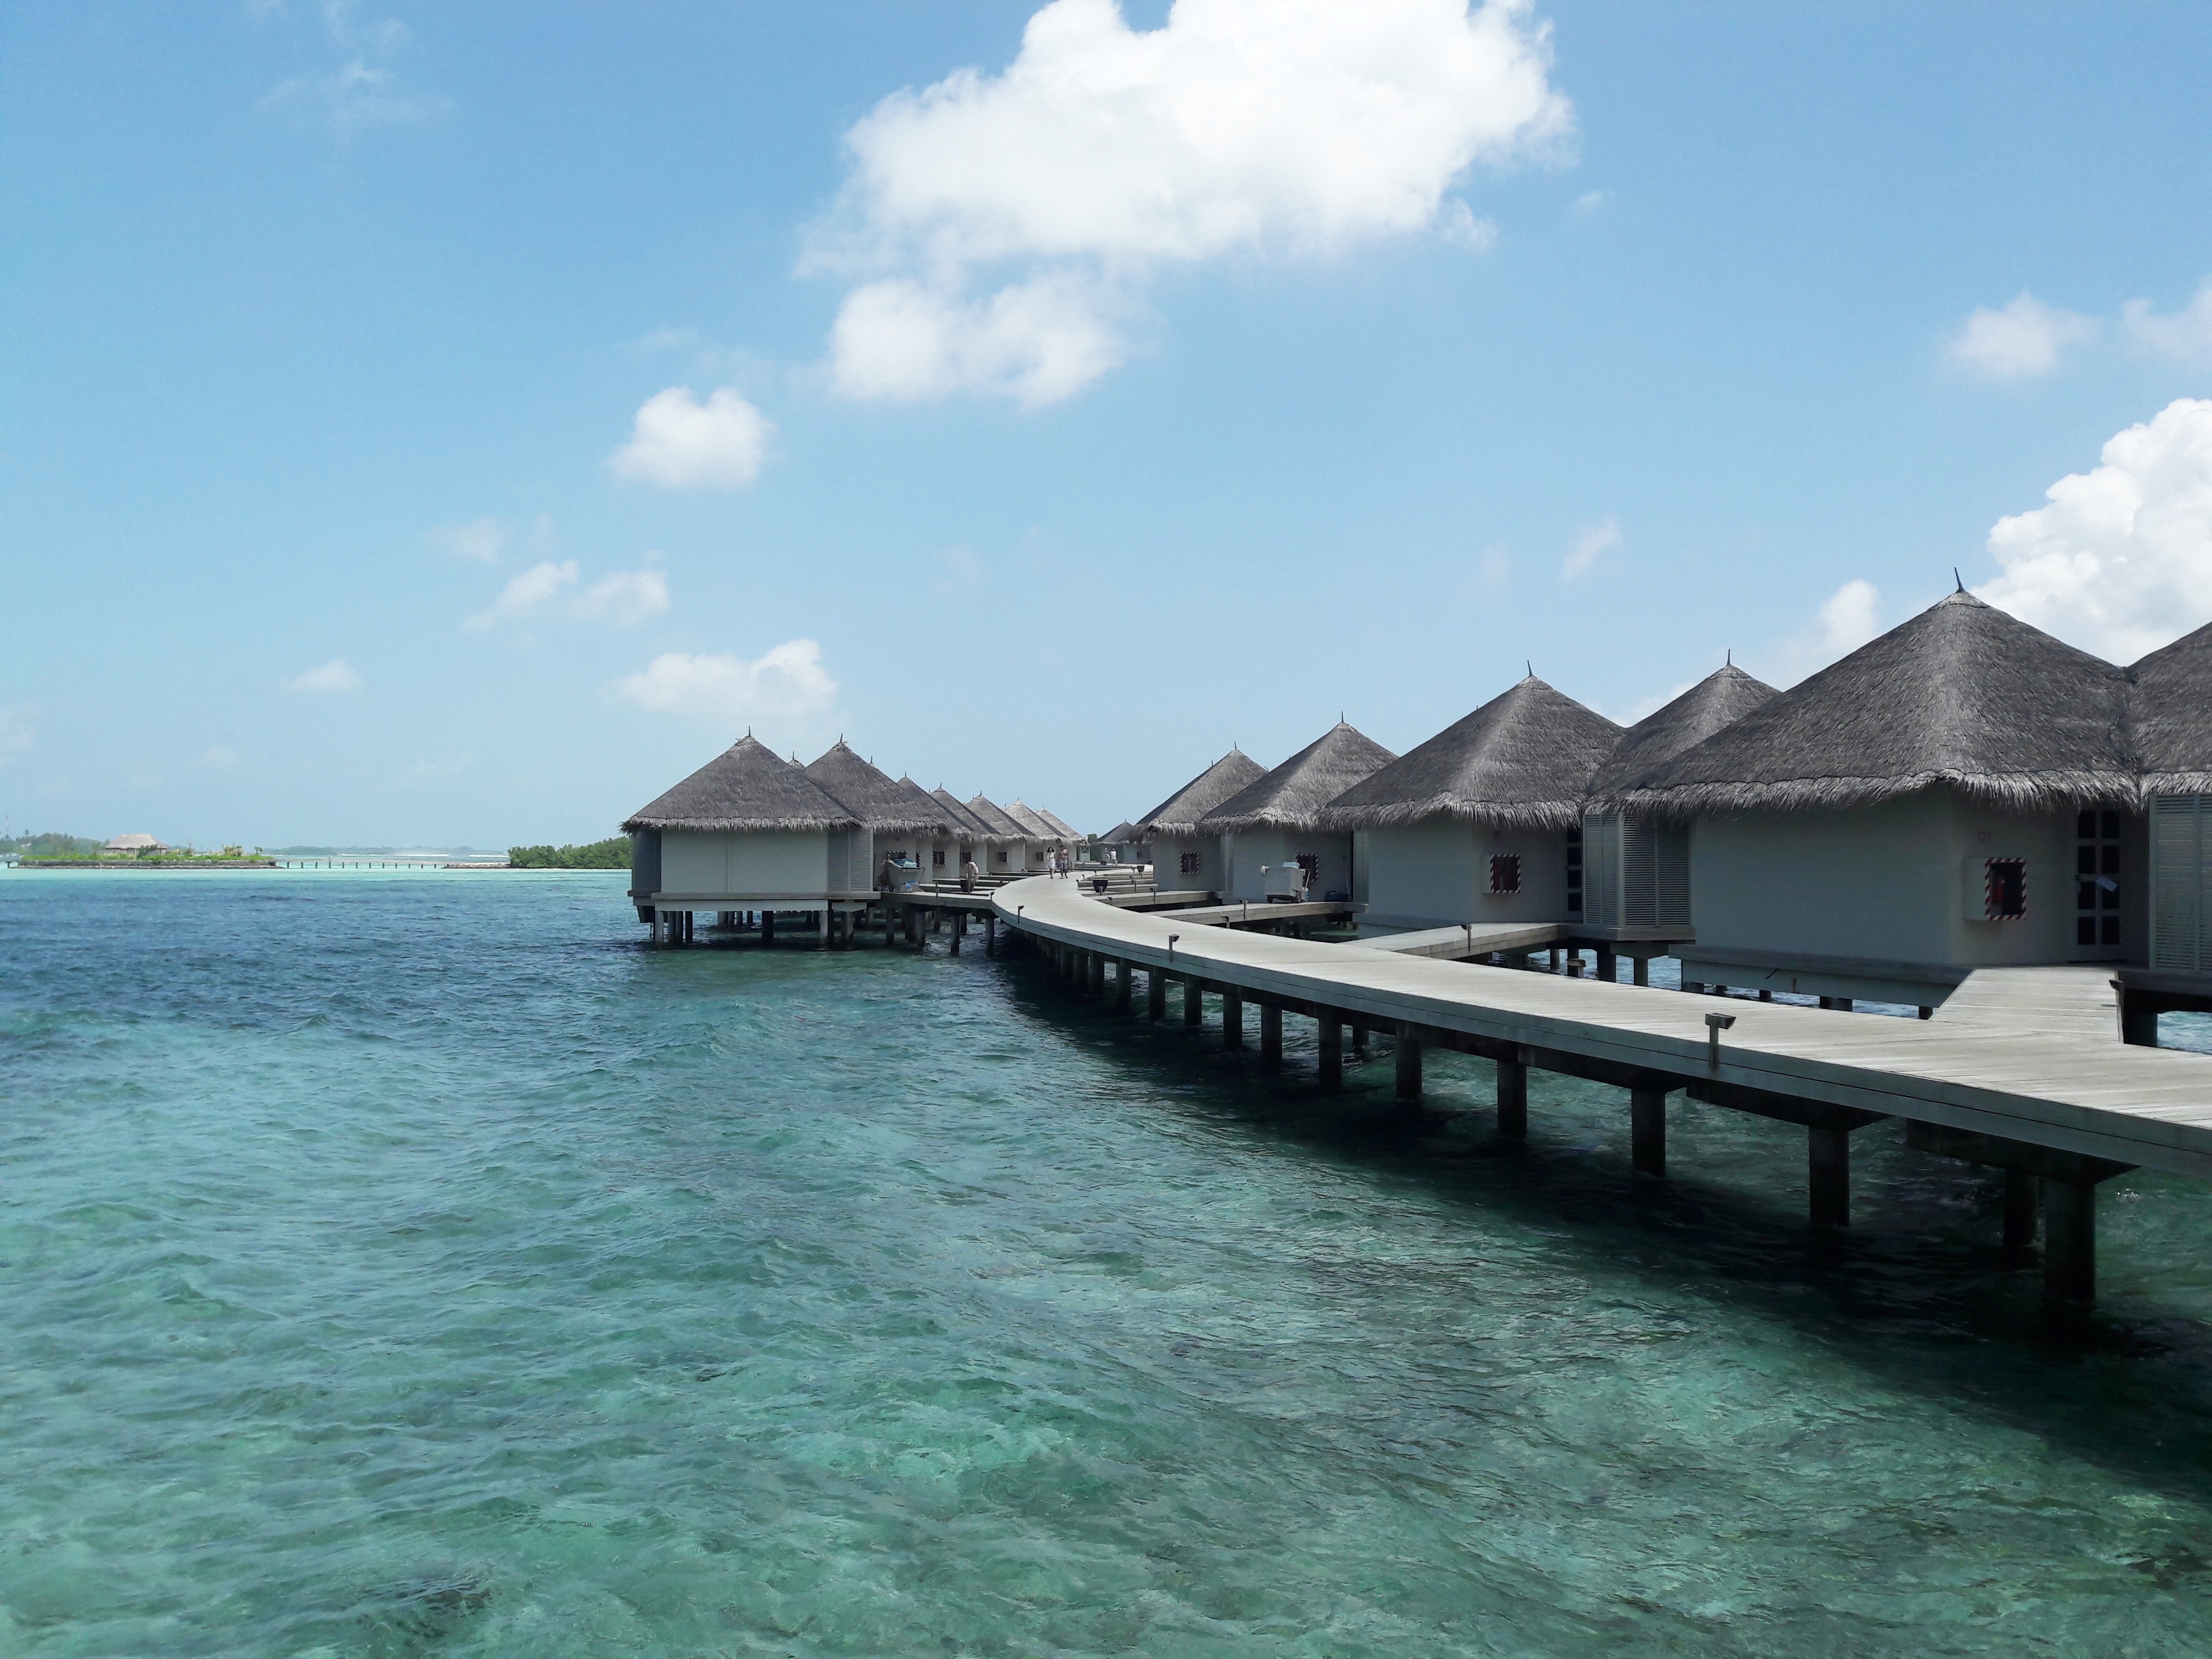 Surreal sight of the Water Bungalows at Cinnamon Dhonveli resort